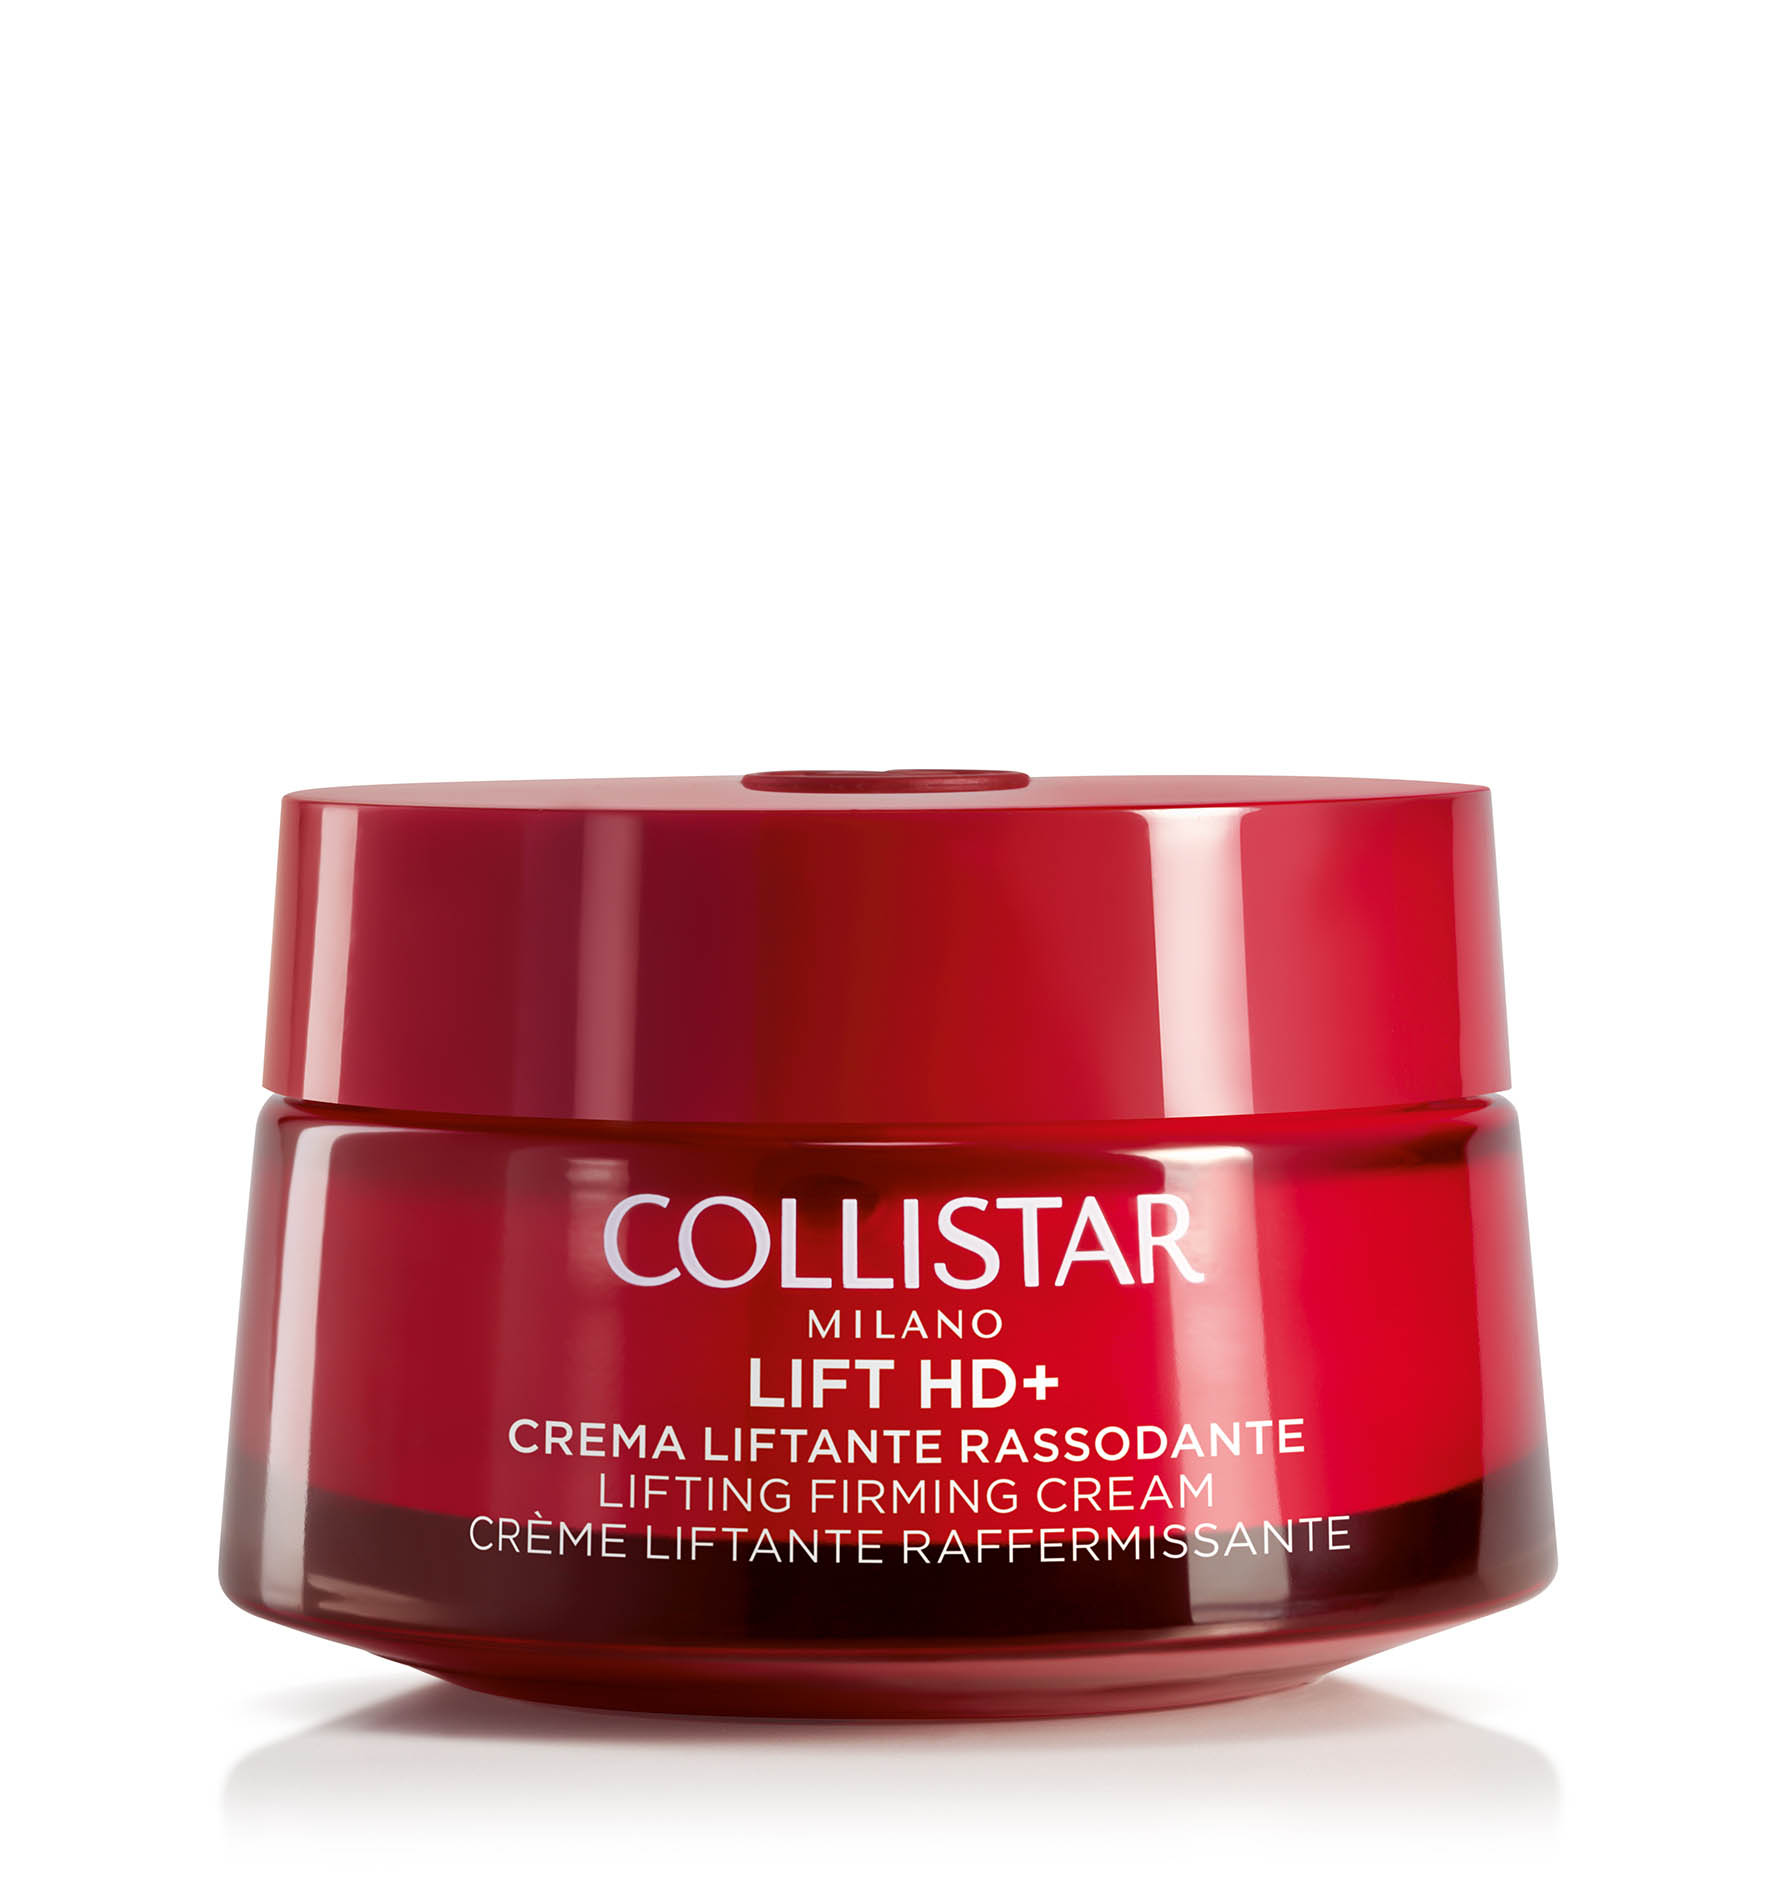 LIFT HD+ LIFTING FIRMING CREAM FACE AND NECK - Lift HD+ | Collistar - Shop Online Ufficiale